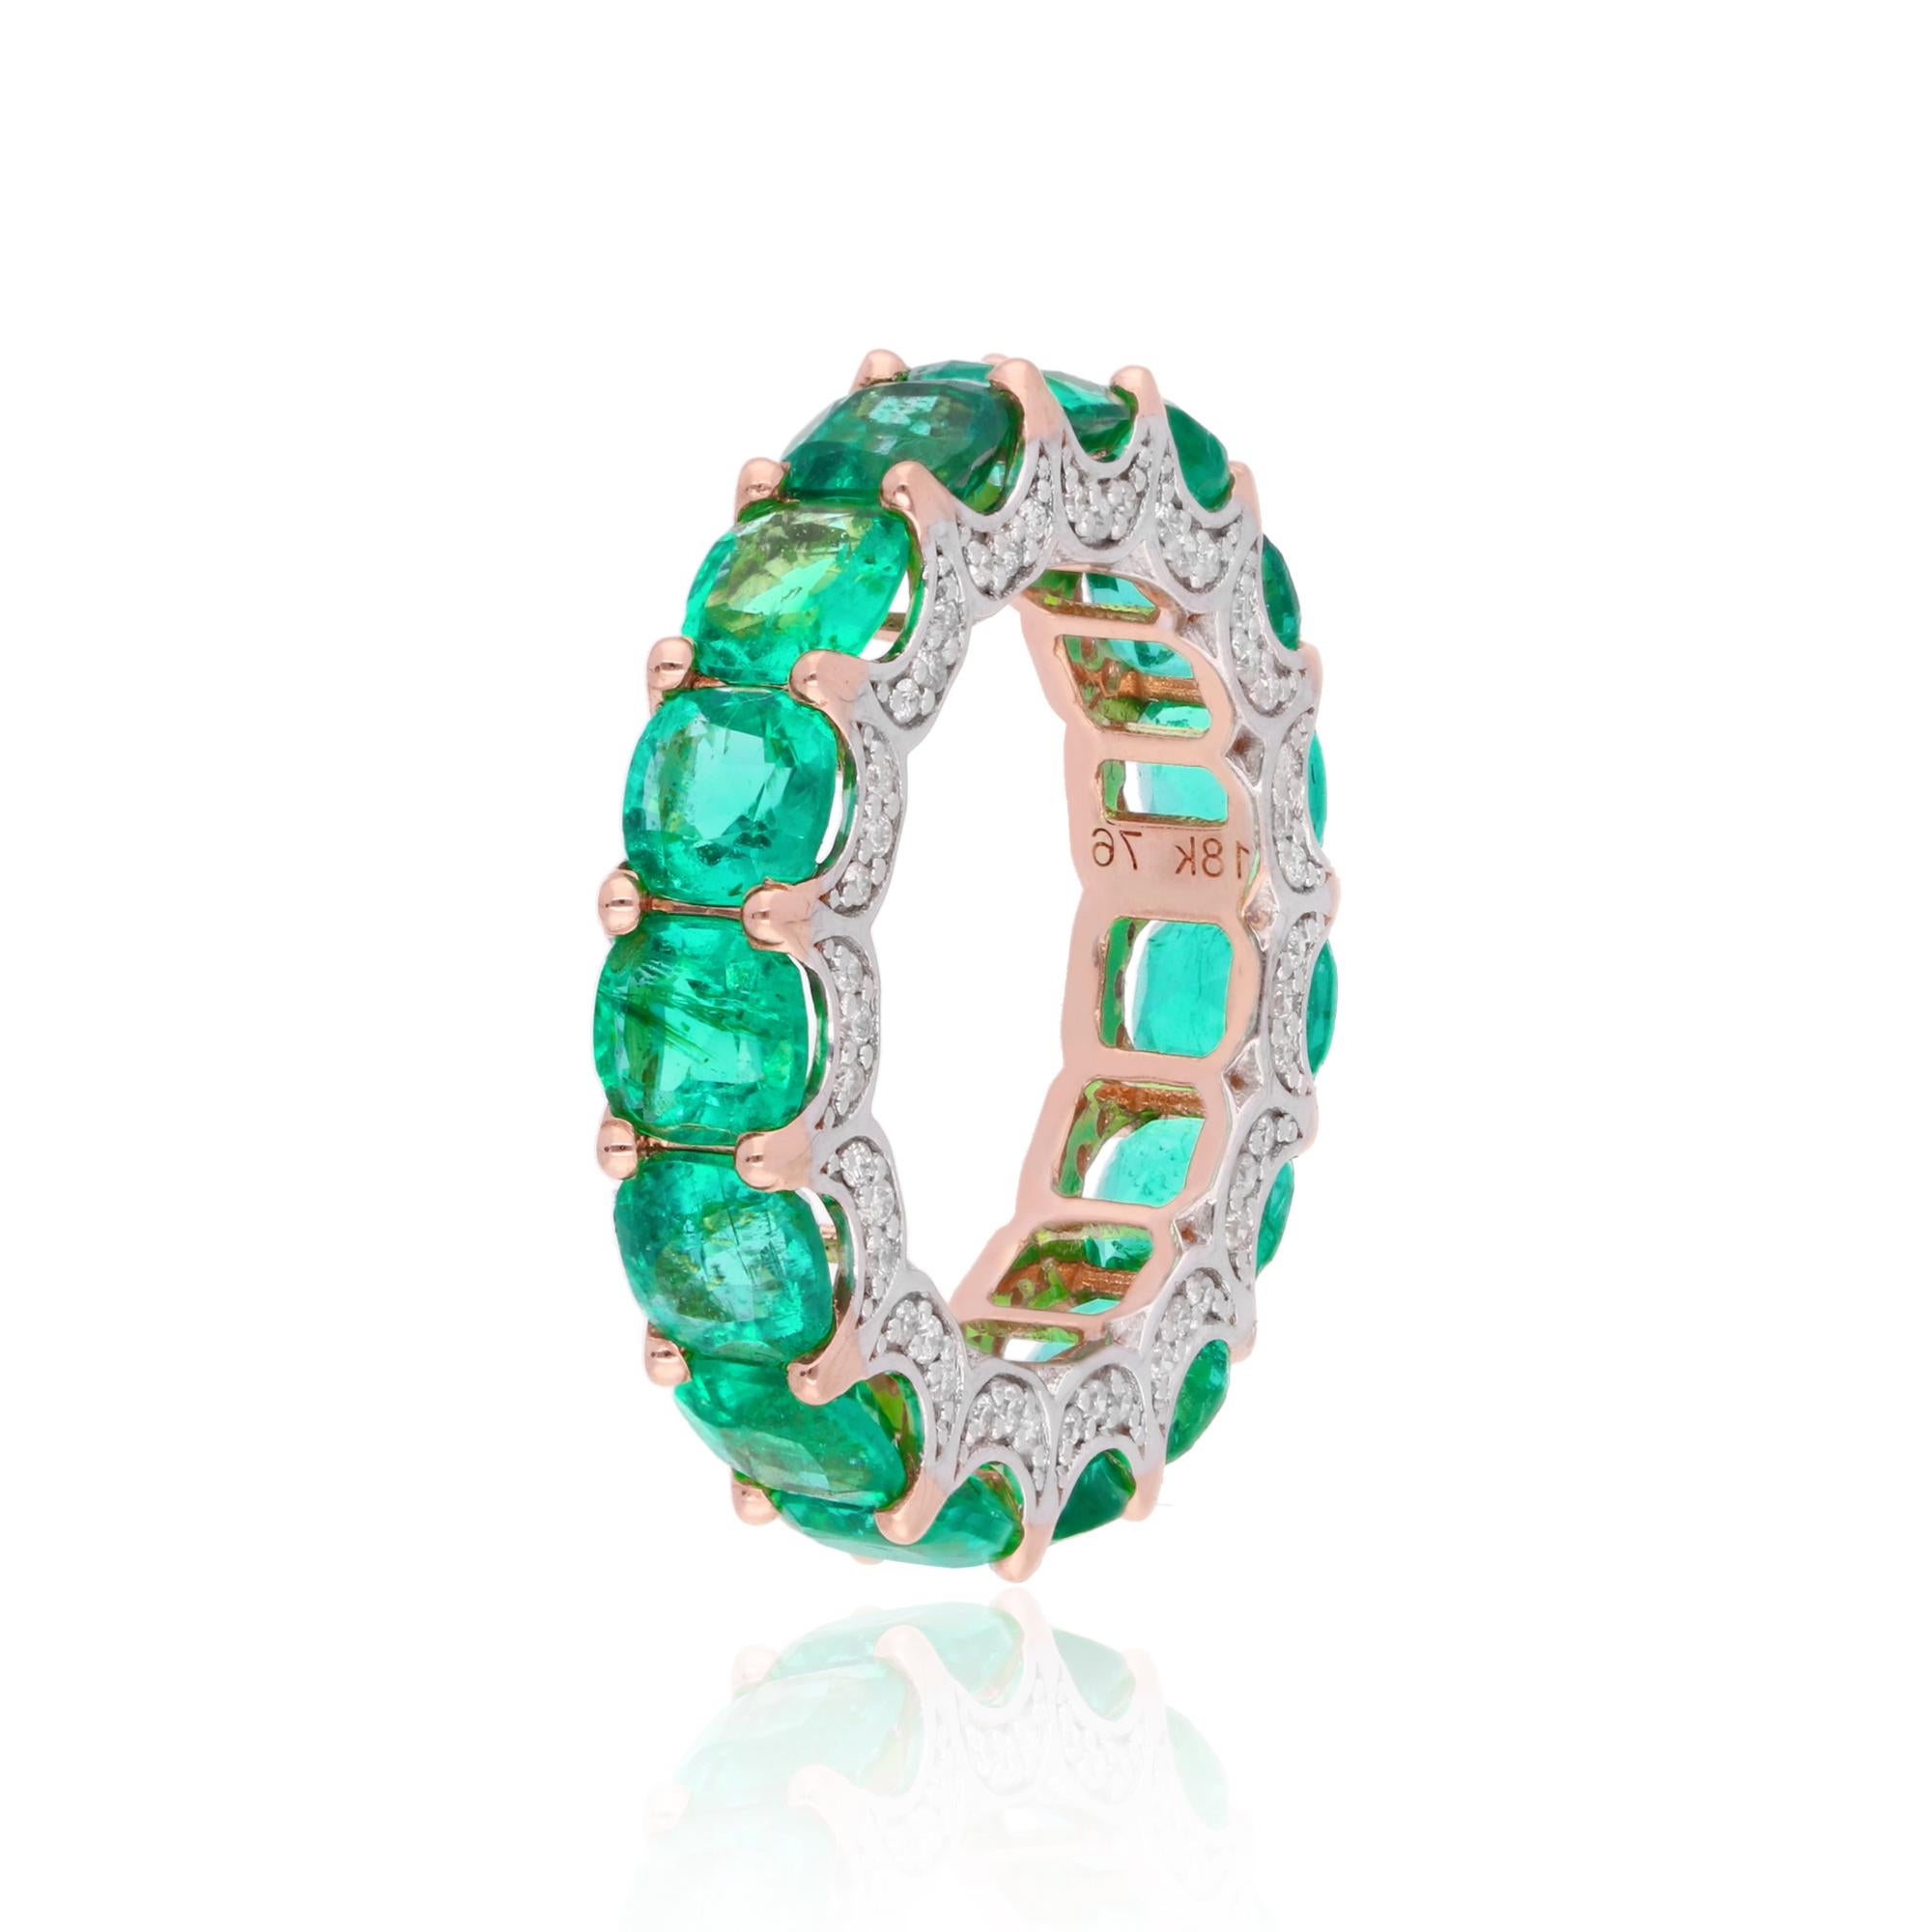 Women's Cushion Natural Emerald Gemstone Band Ring Pave Diamond 18k Rose Gold Jewelry For Sale